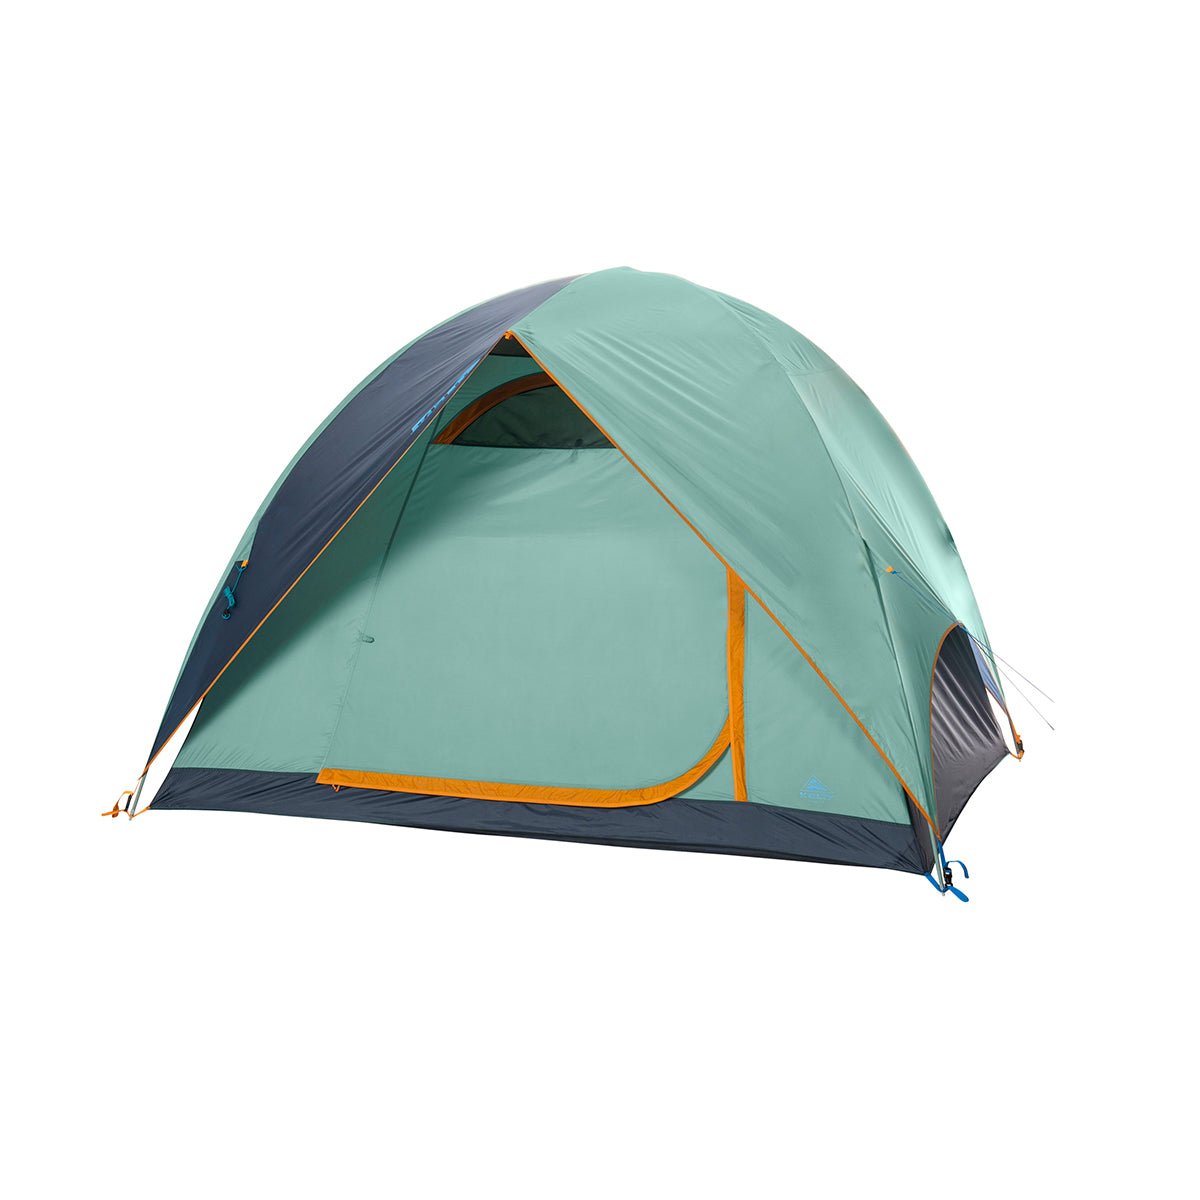 kelty tallboy 4 person tent with fly on and door closed in color teal with orange accents